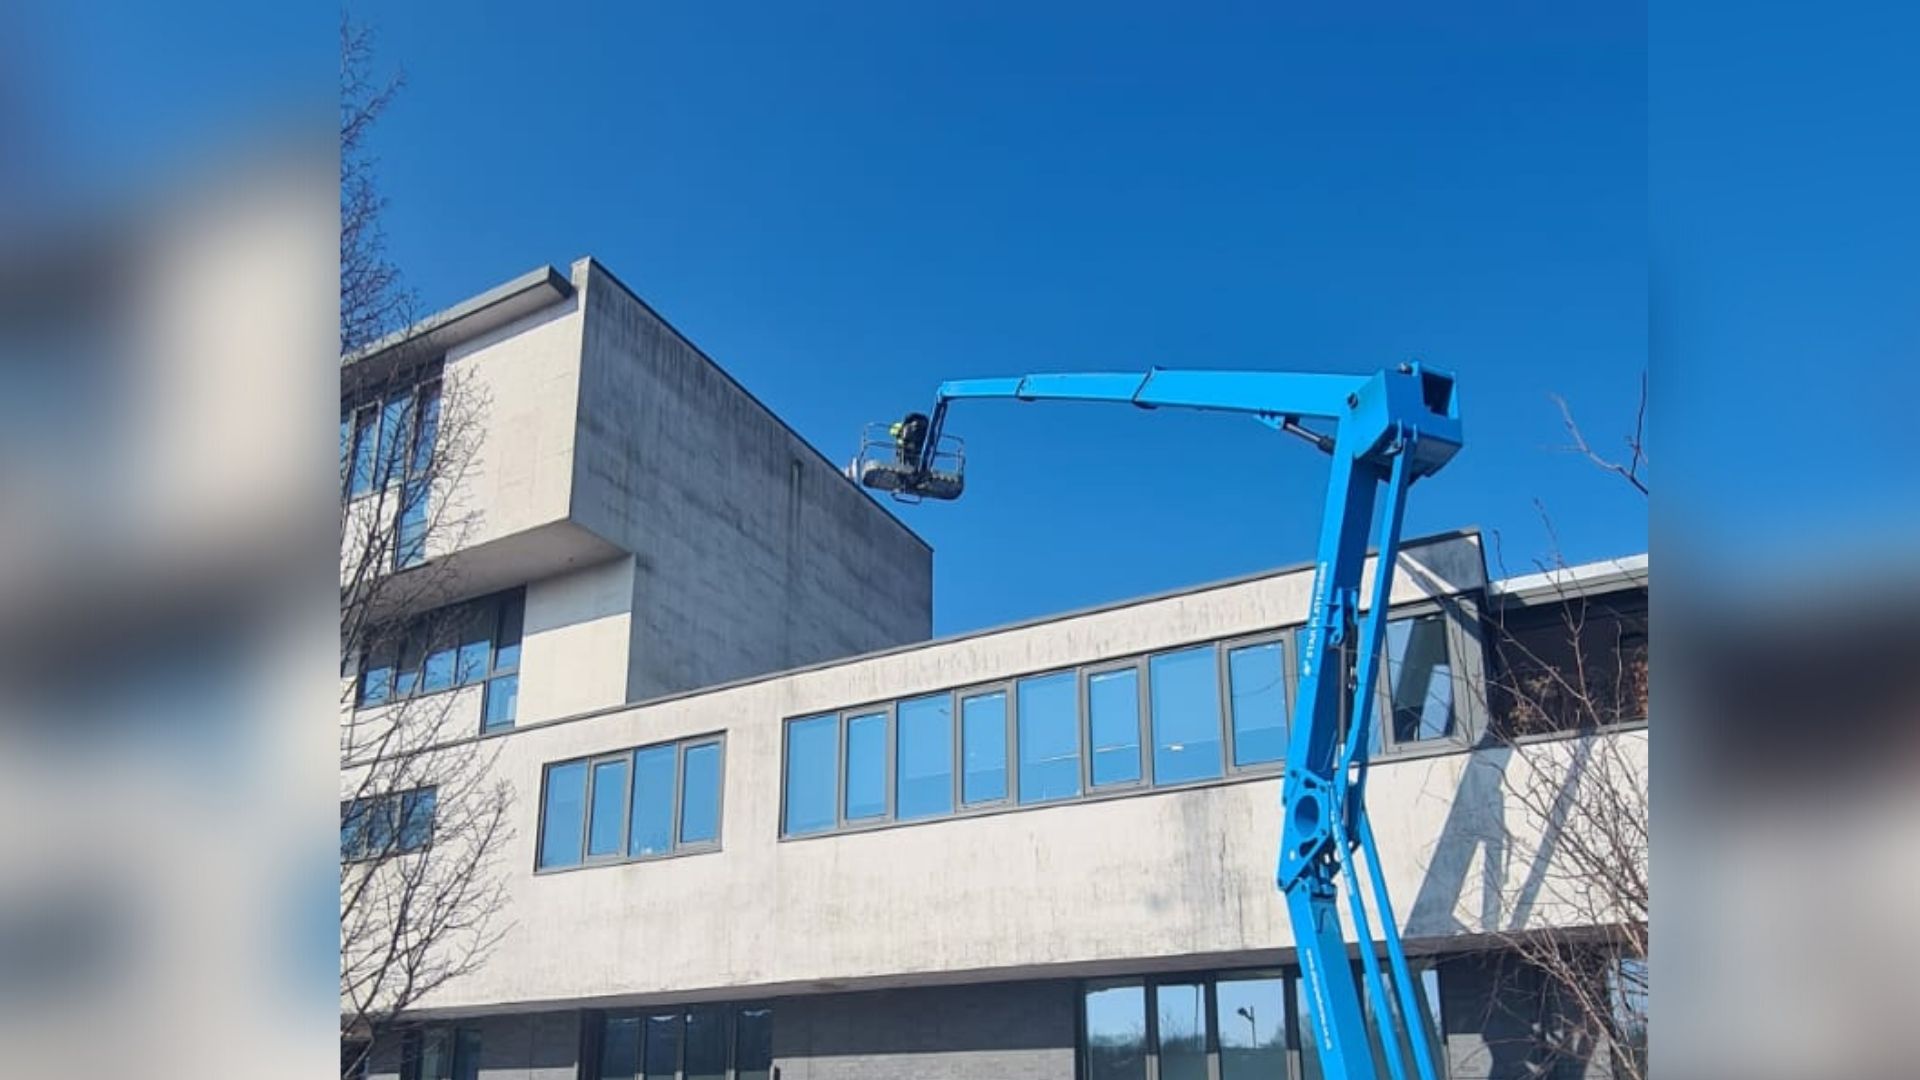 Stone Wall Cleaning Using Cherry Picker to help illustrate Vinci's stone cleaning services.